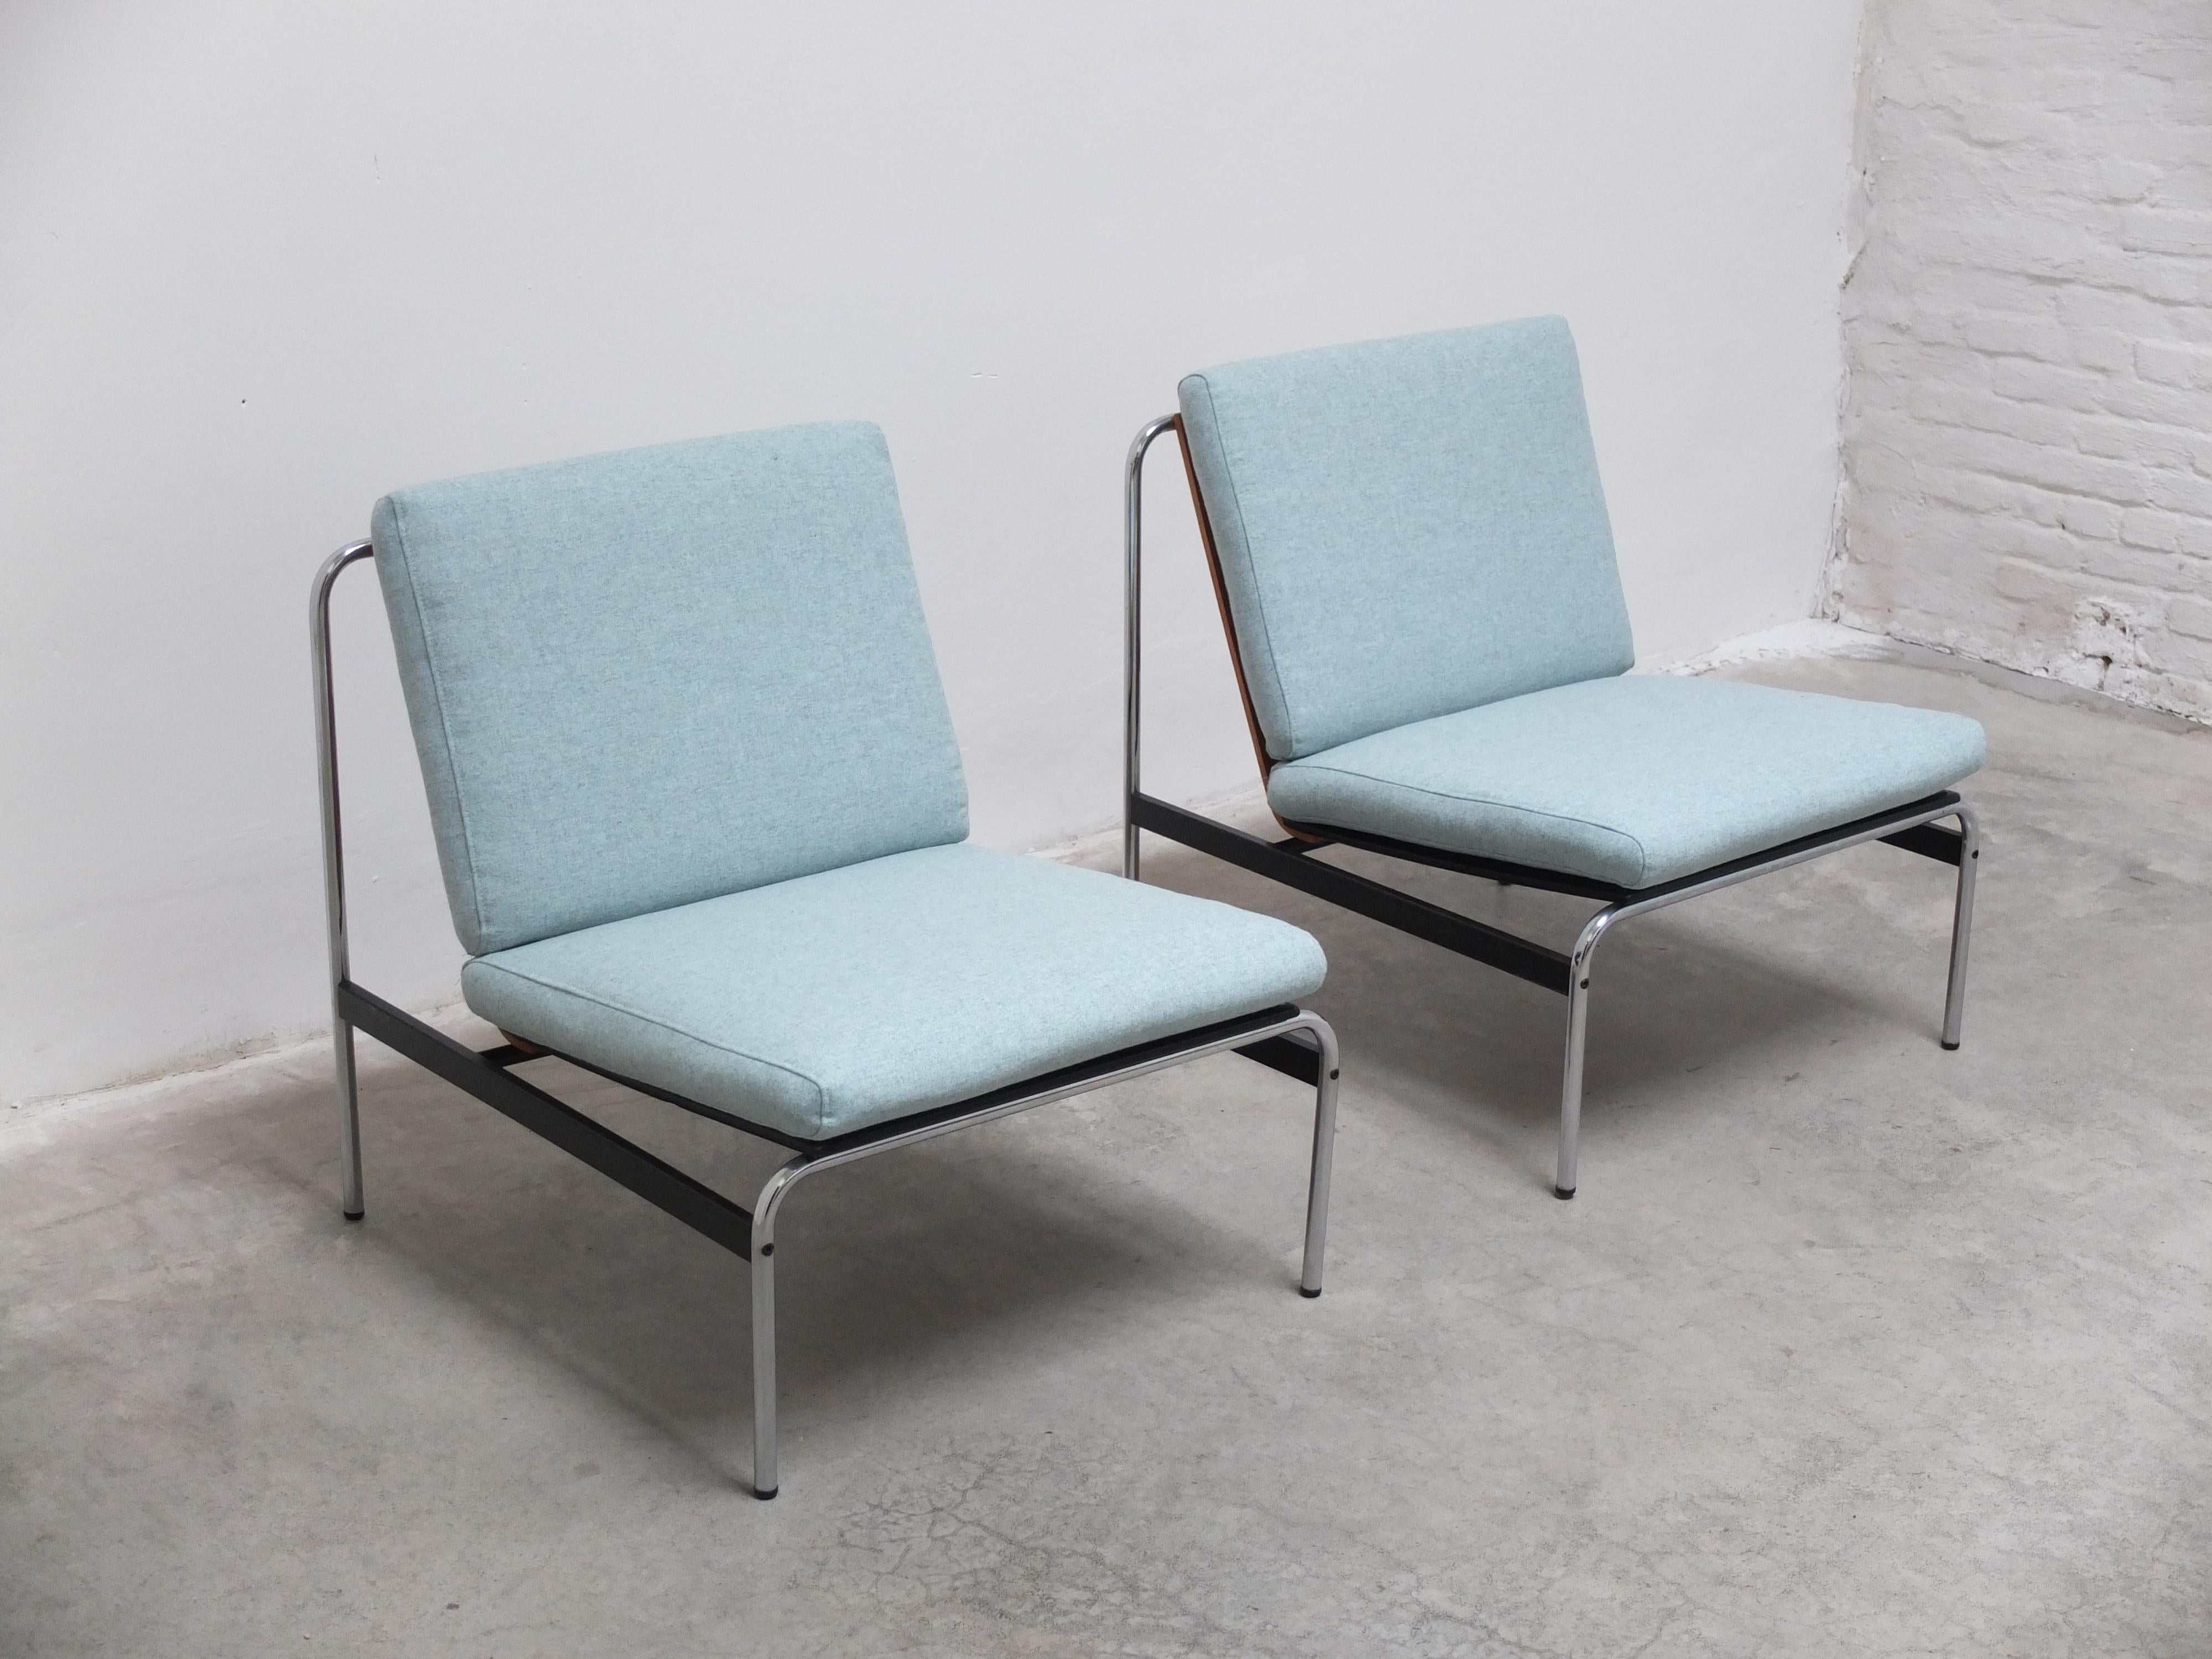 Mid-Century Modern Modernist Pair of Easy Chairs in The Style of Kho Liang Ie, 1960s For Sale